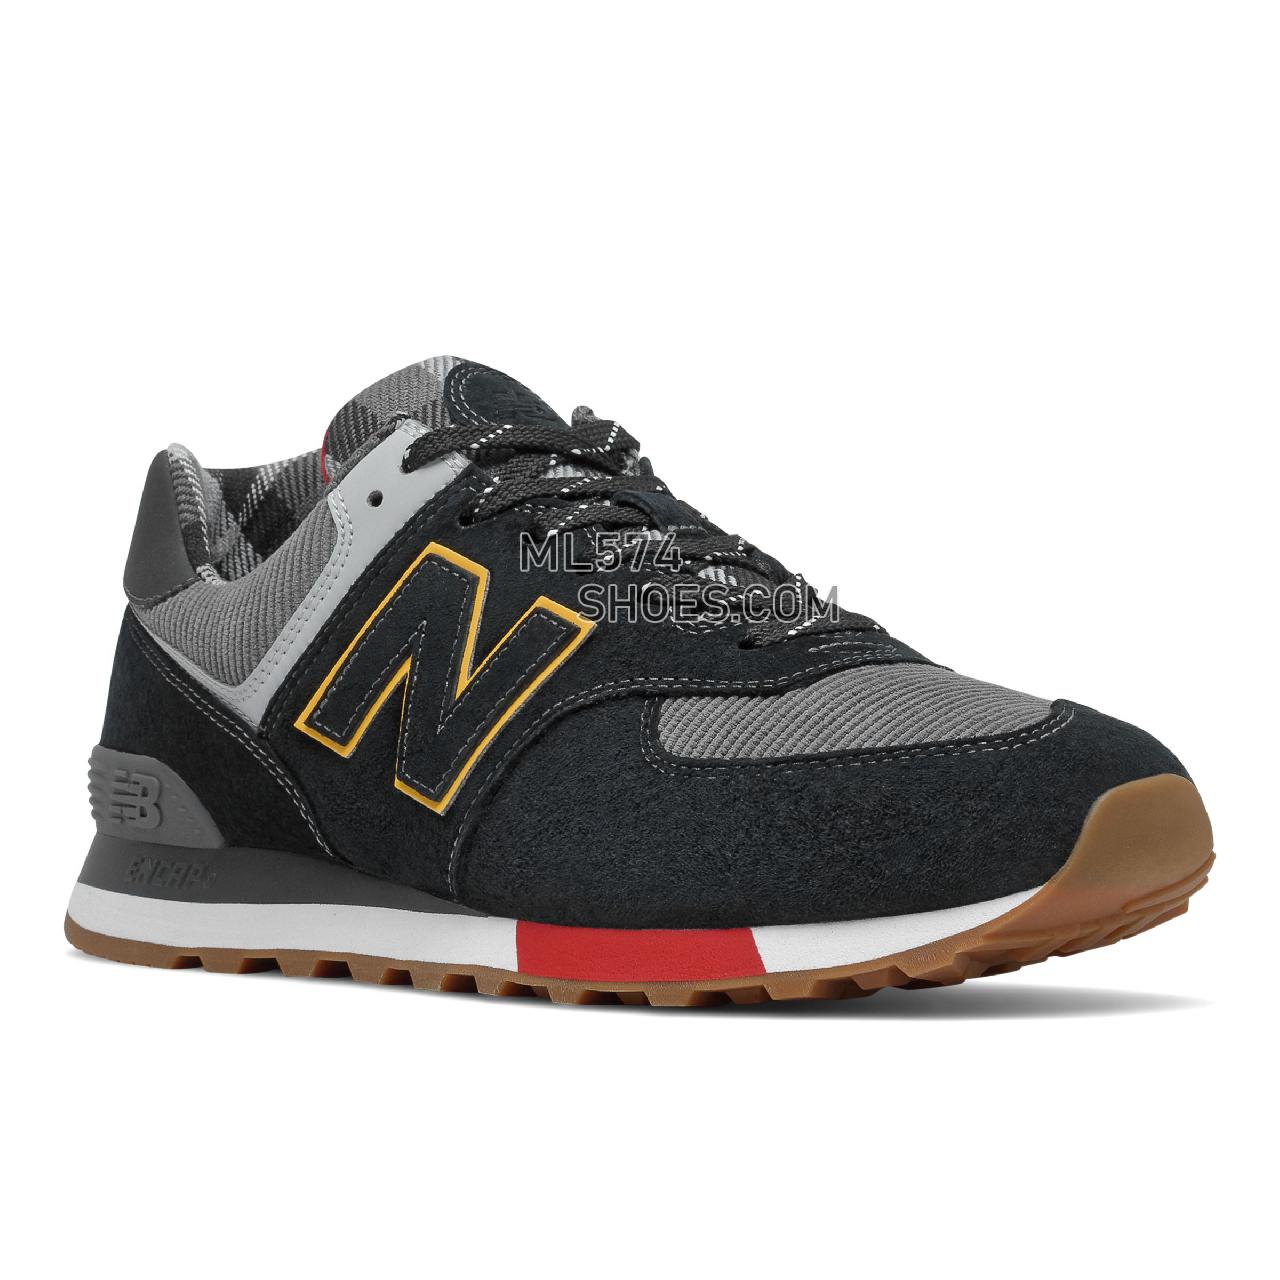 New Balance 574v2 - Men's Classic Sneakers - Black with Team Red - ML574HMJ